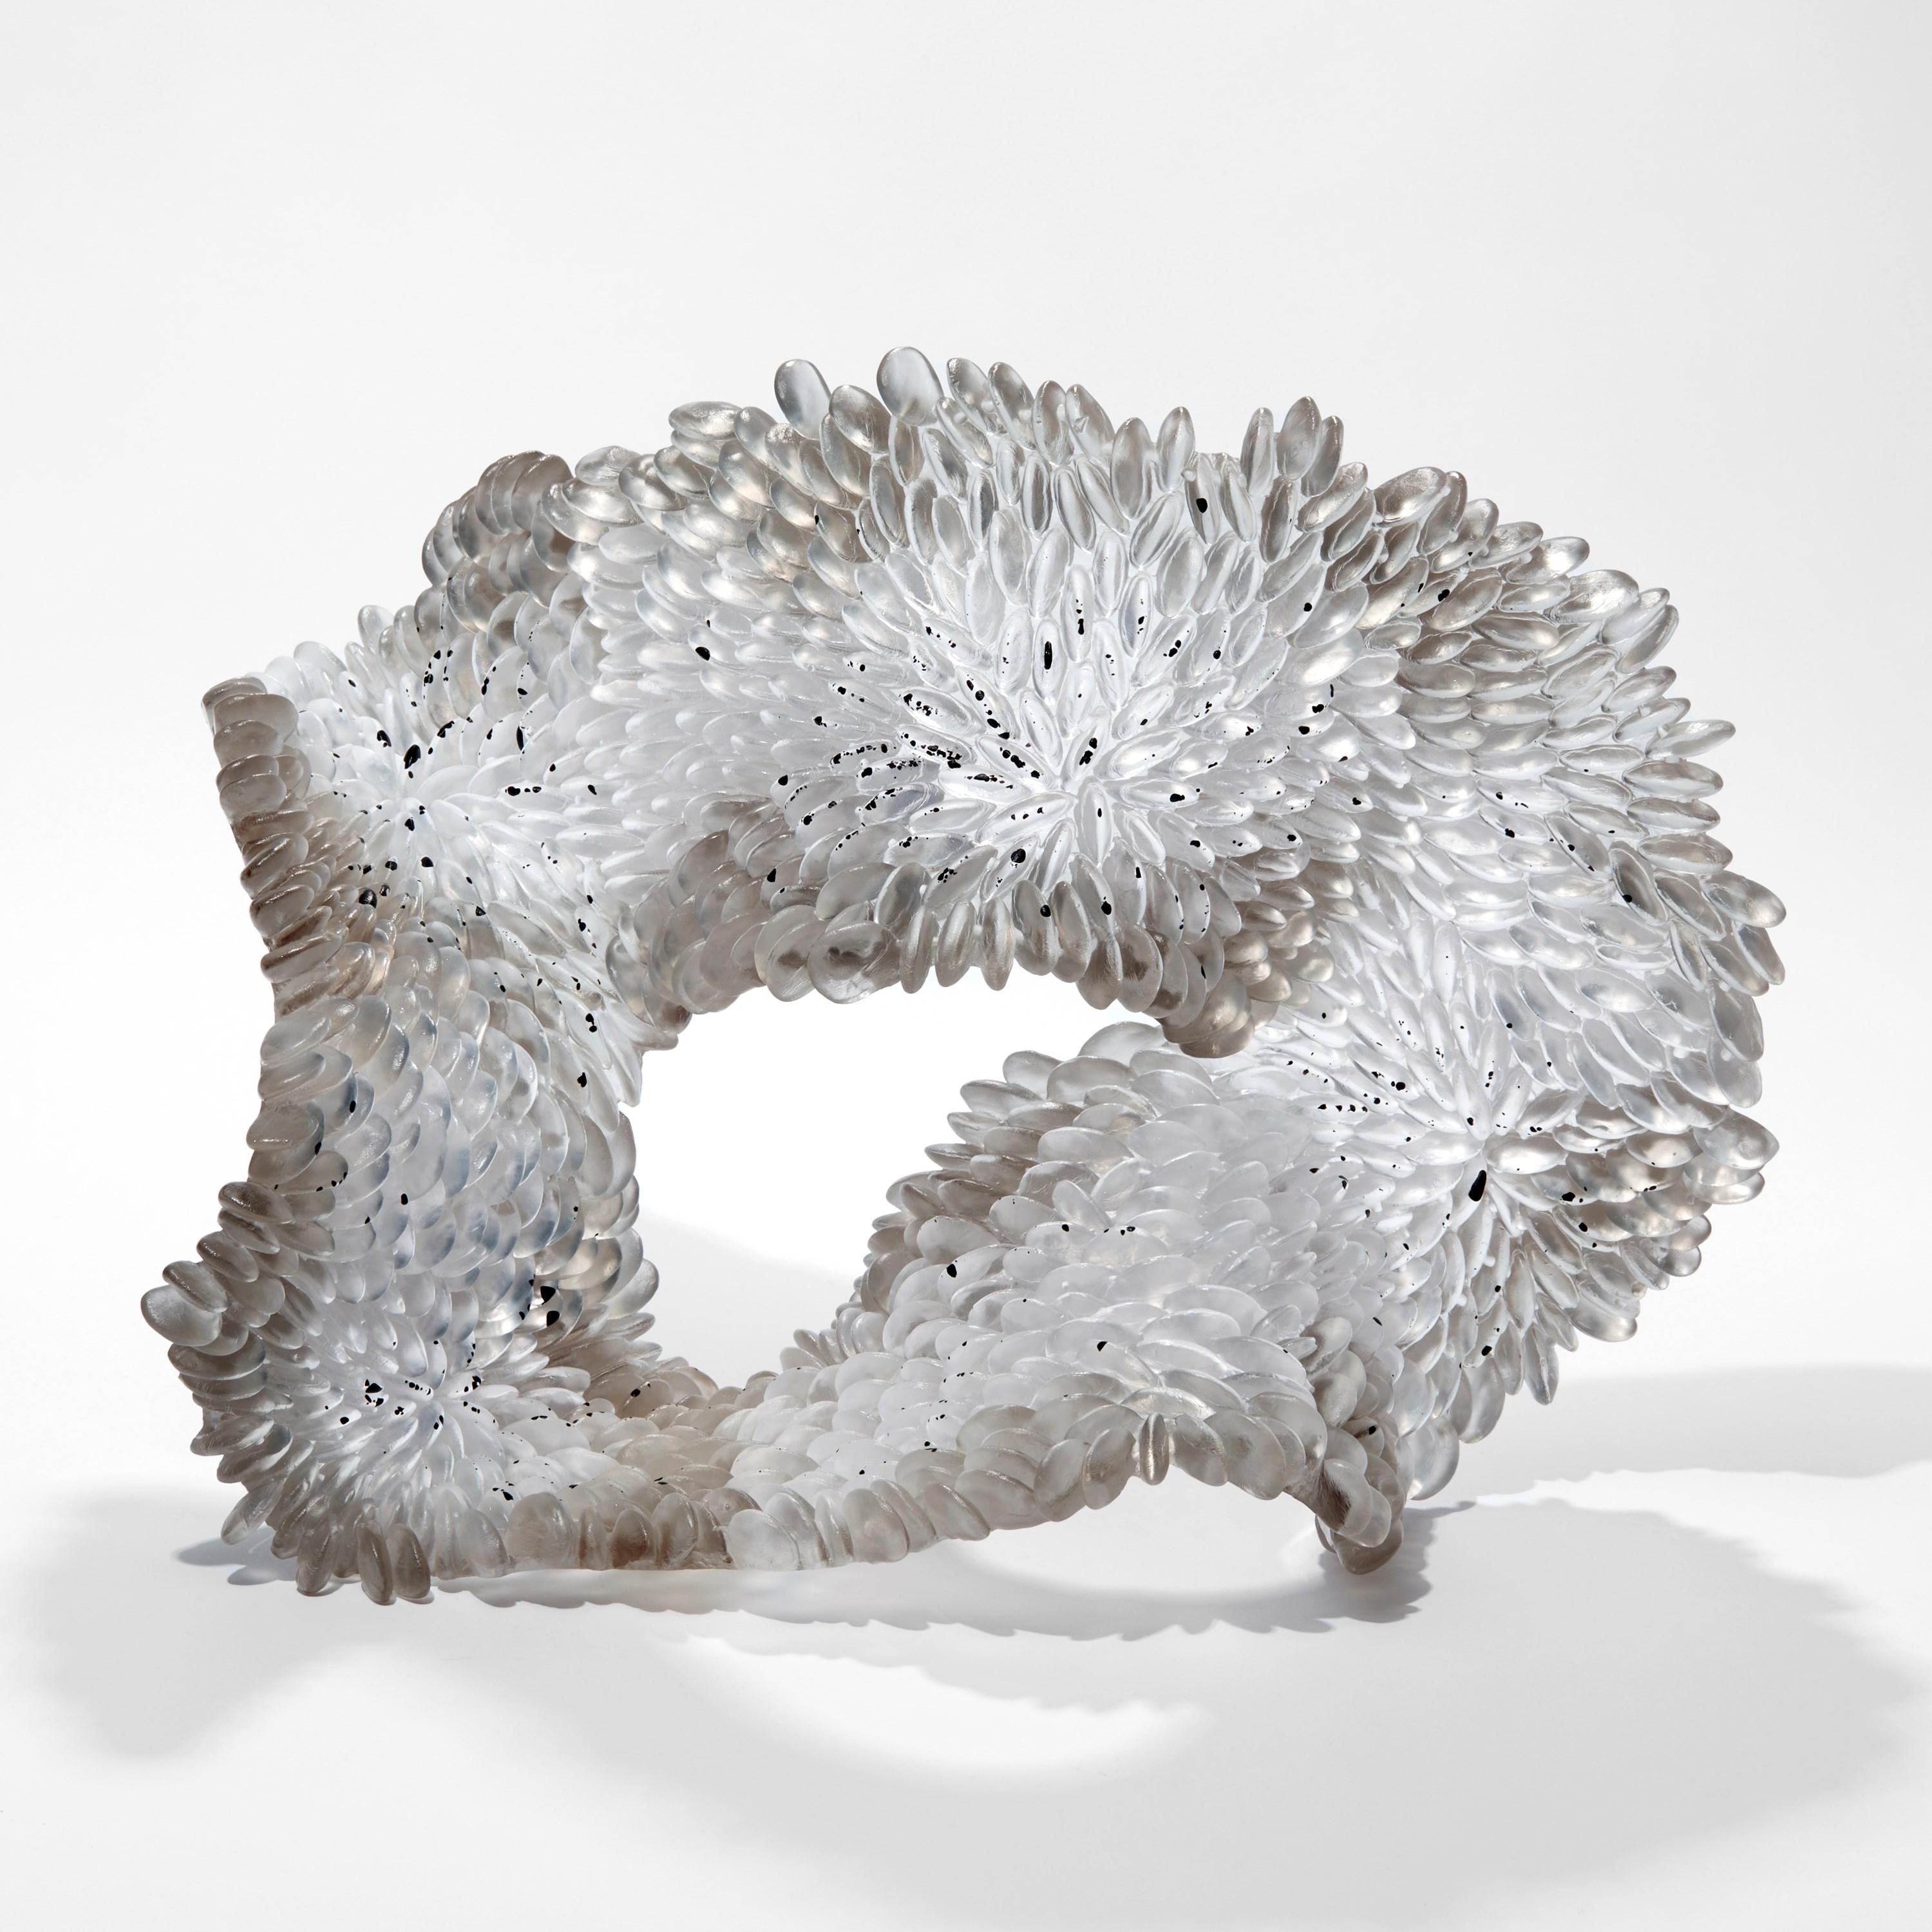 'Speckled Grey' is a unique glass sculpture by the British artist, Nina Casson McGarva.

Casson McGarva firstly casts her glass in a flat mould where she introduces all of the beautifully detailed, scaled surface texture, all unique and to her